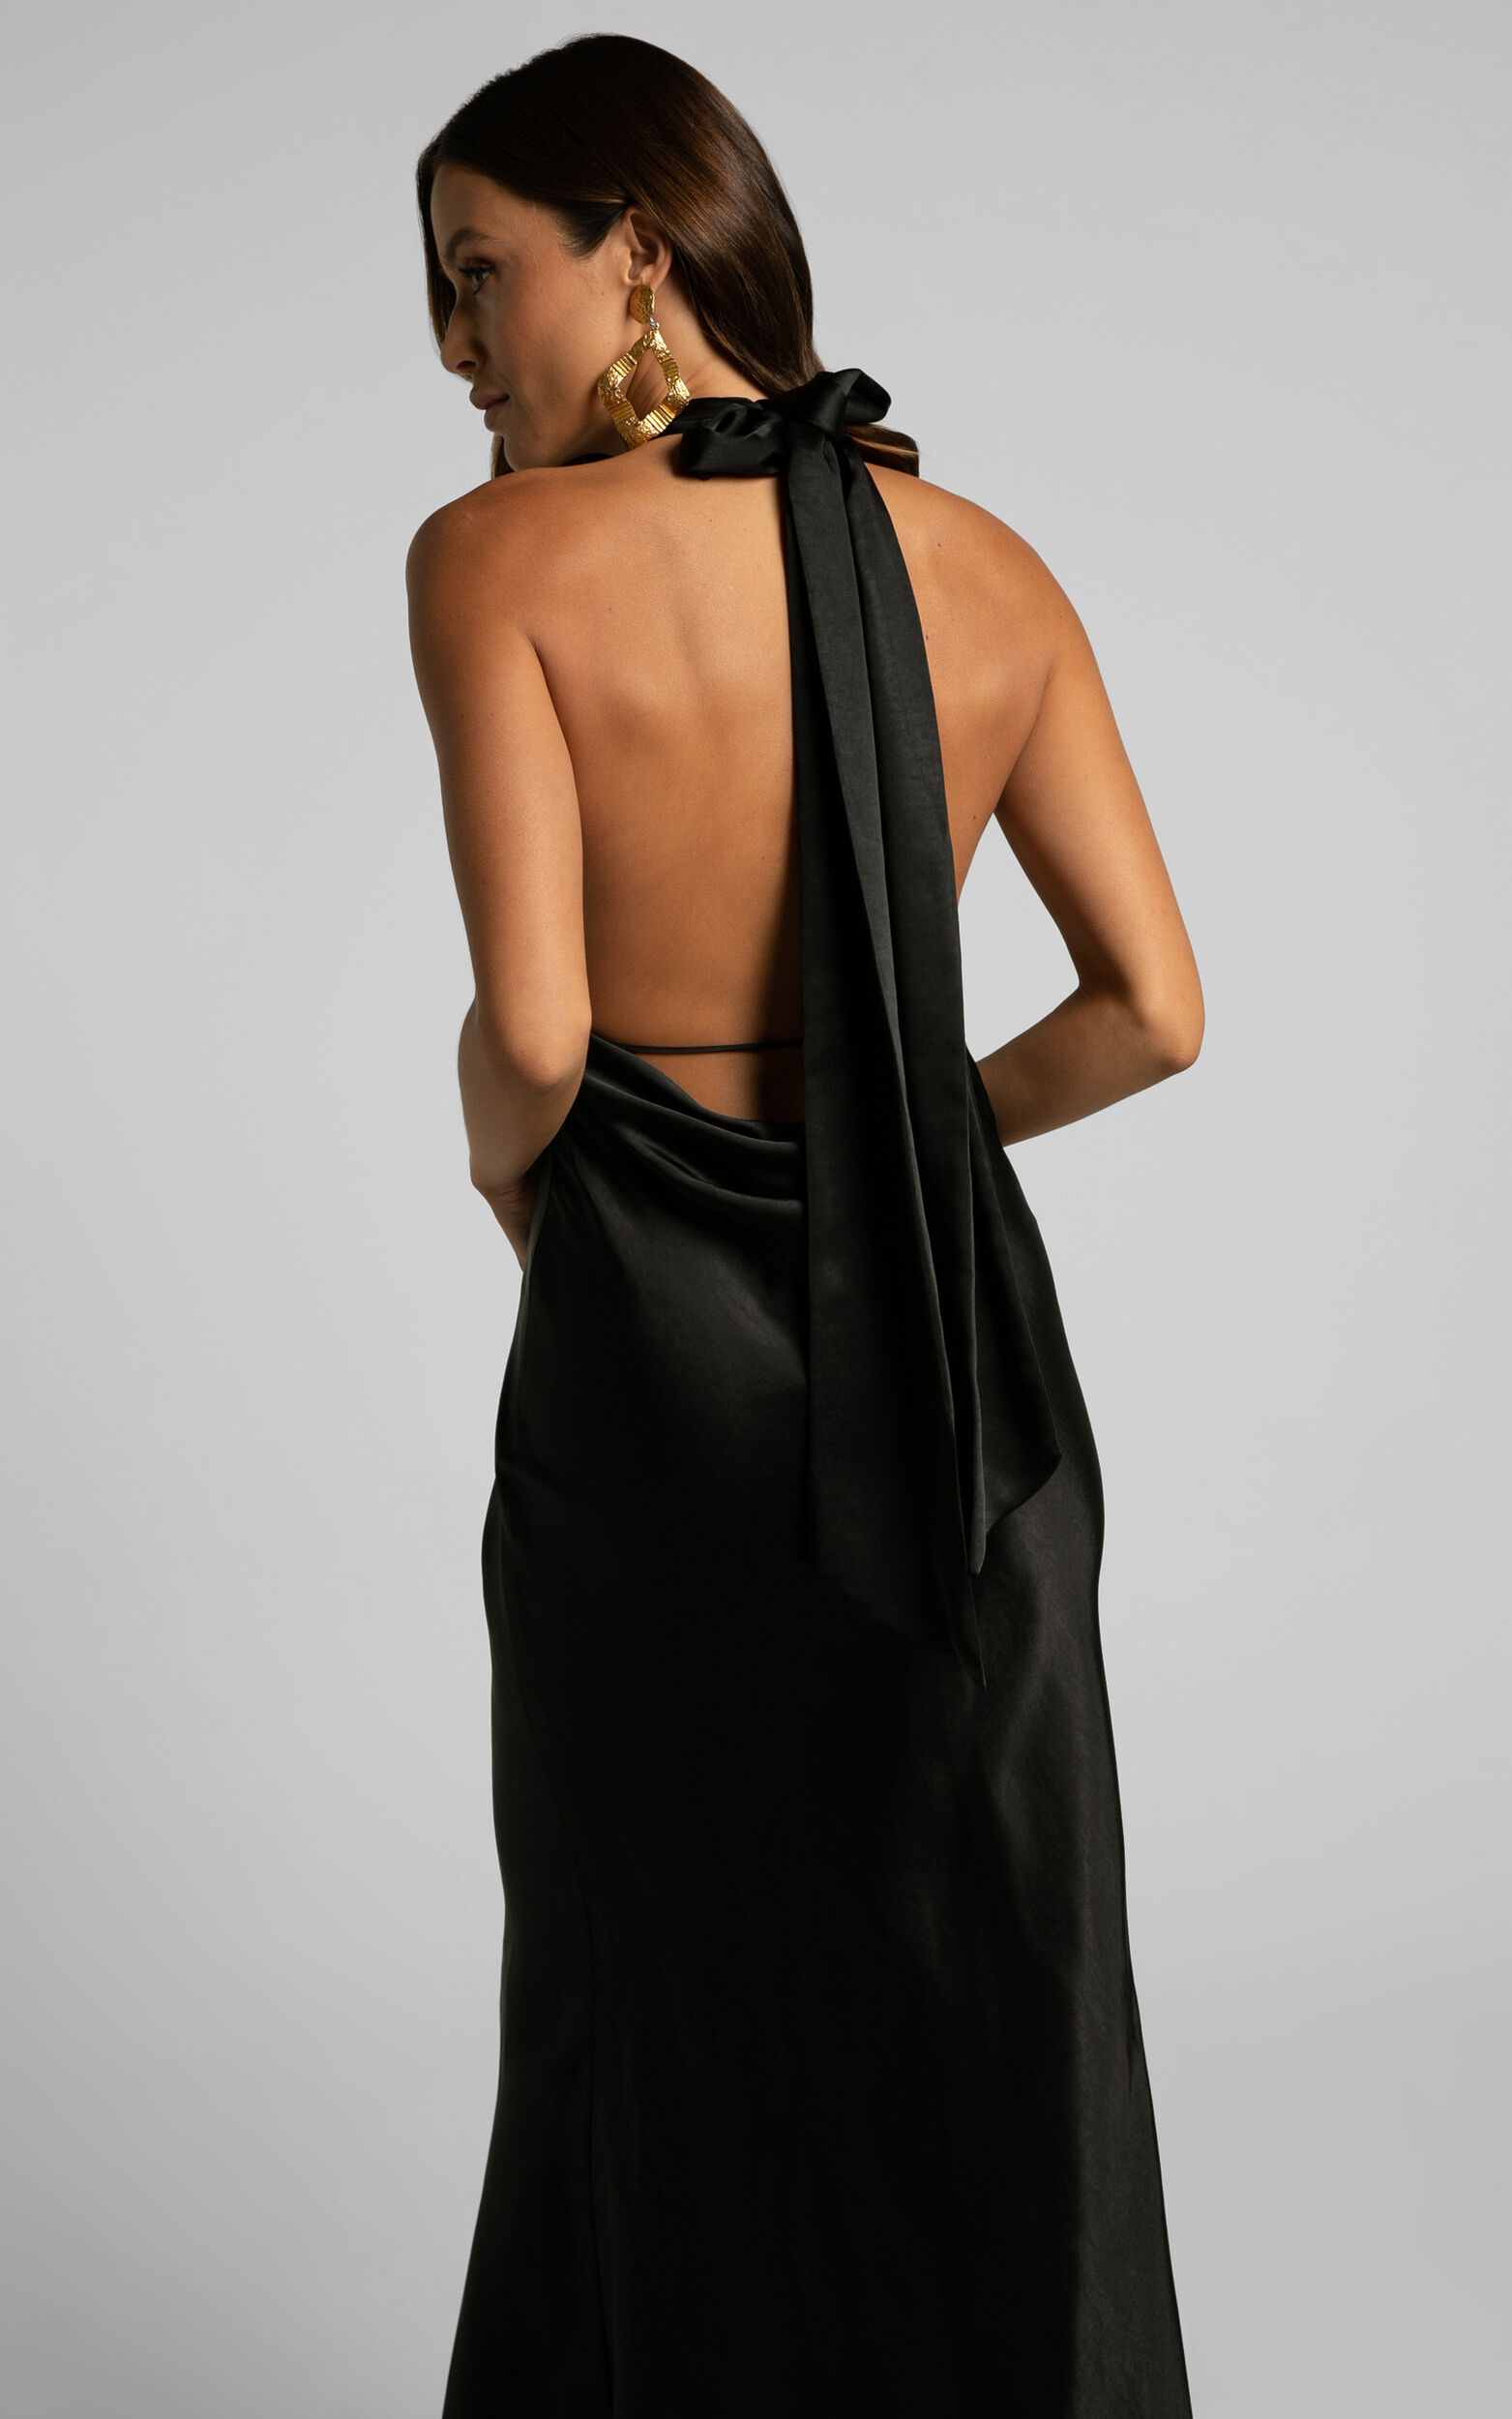 Introduction to the Black Halter Neck Dress